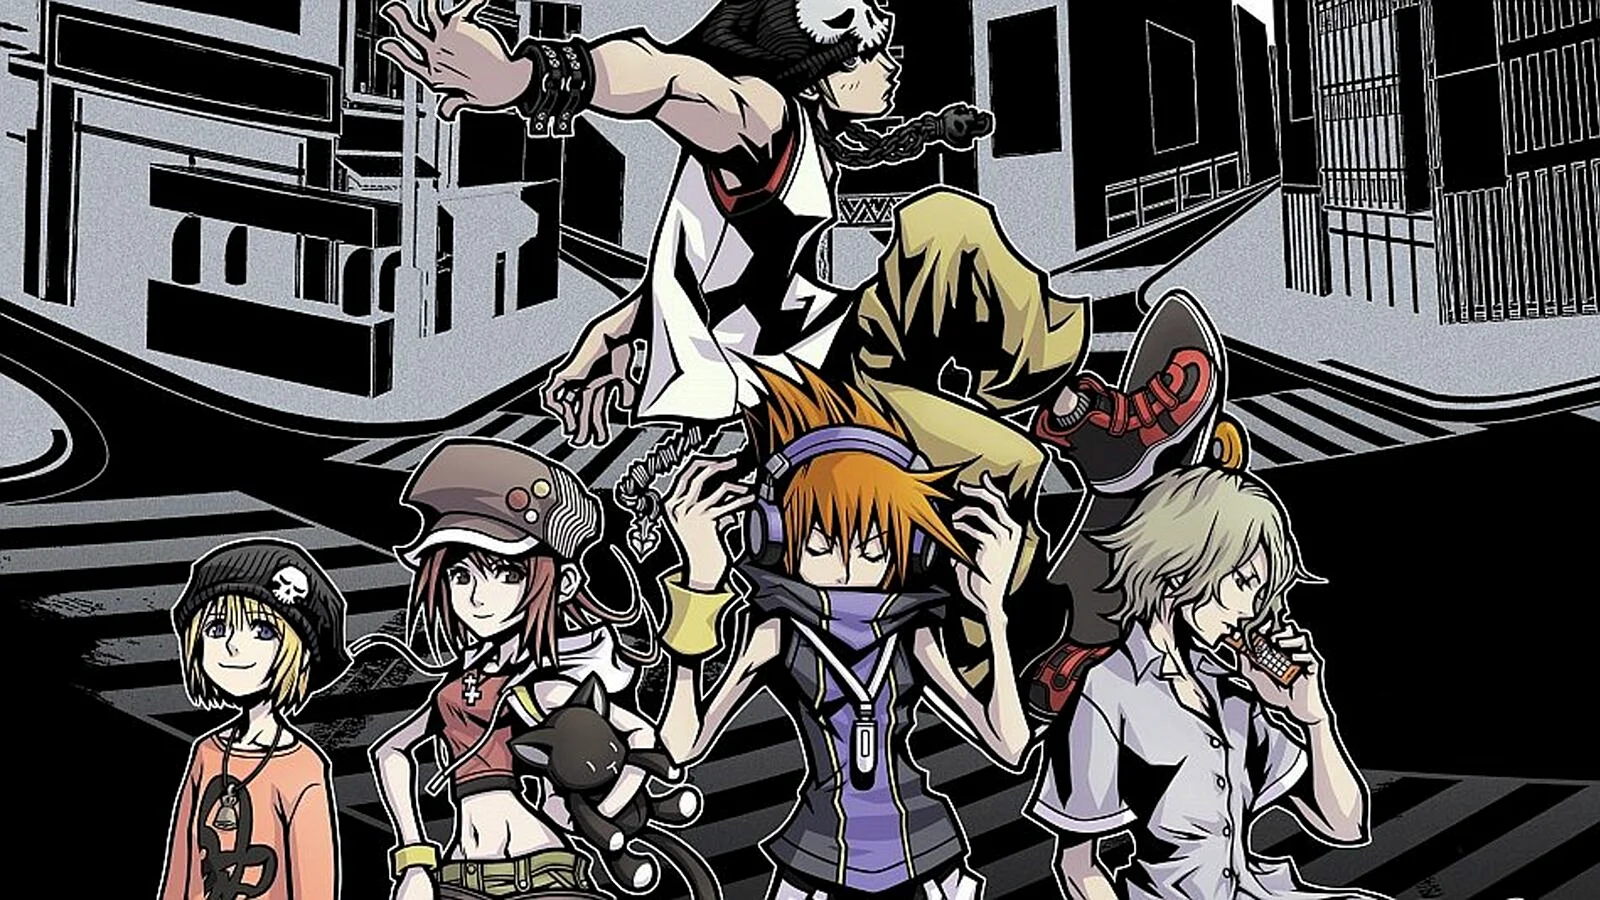 The World Ends With You Wallpaper